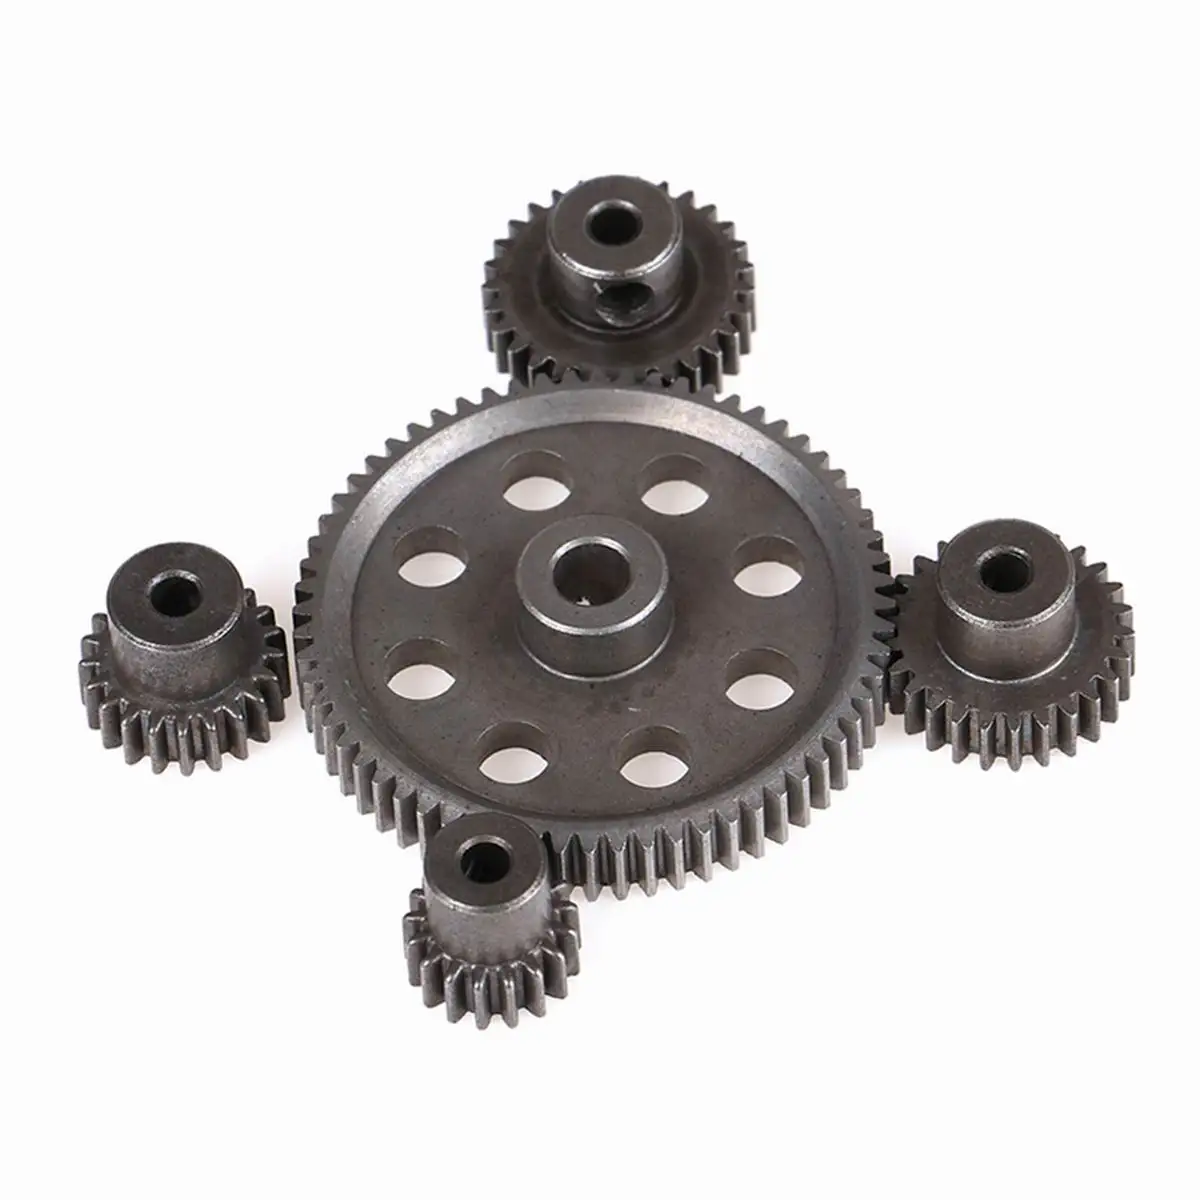 

11184 Metal Diff Main Gear 64T 11181 Motor Pinion Gears 21T Truck 1/10 RC Parts HSP BRONTOSAURUS Himoto Amax Redcat Exceed 94111